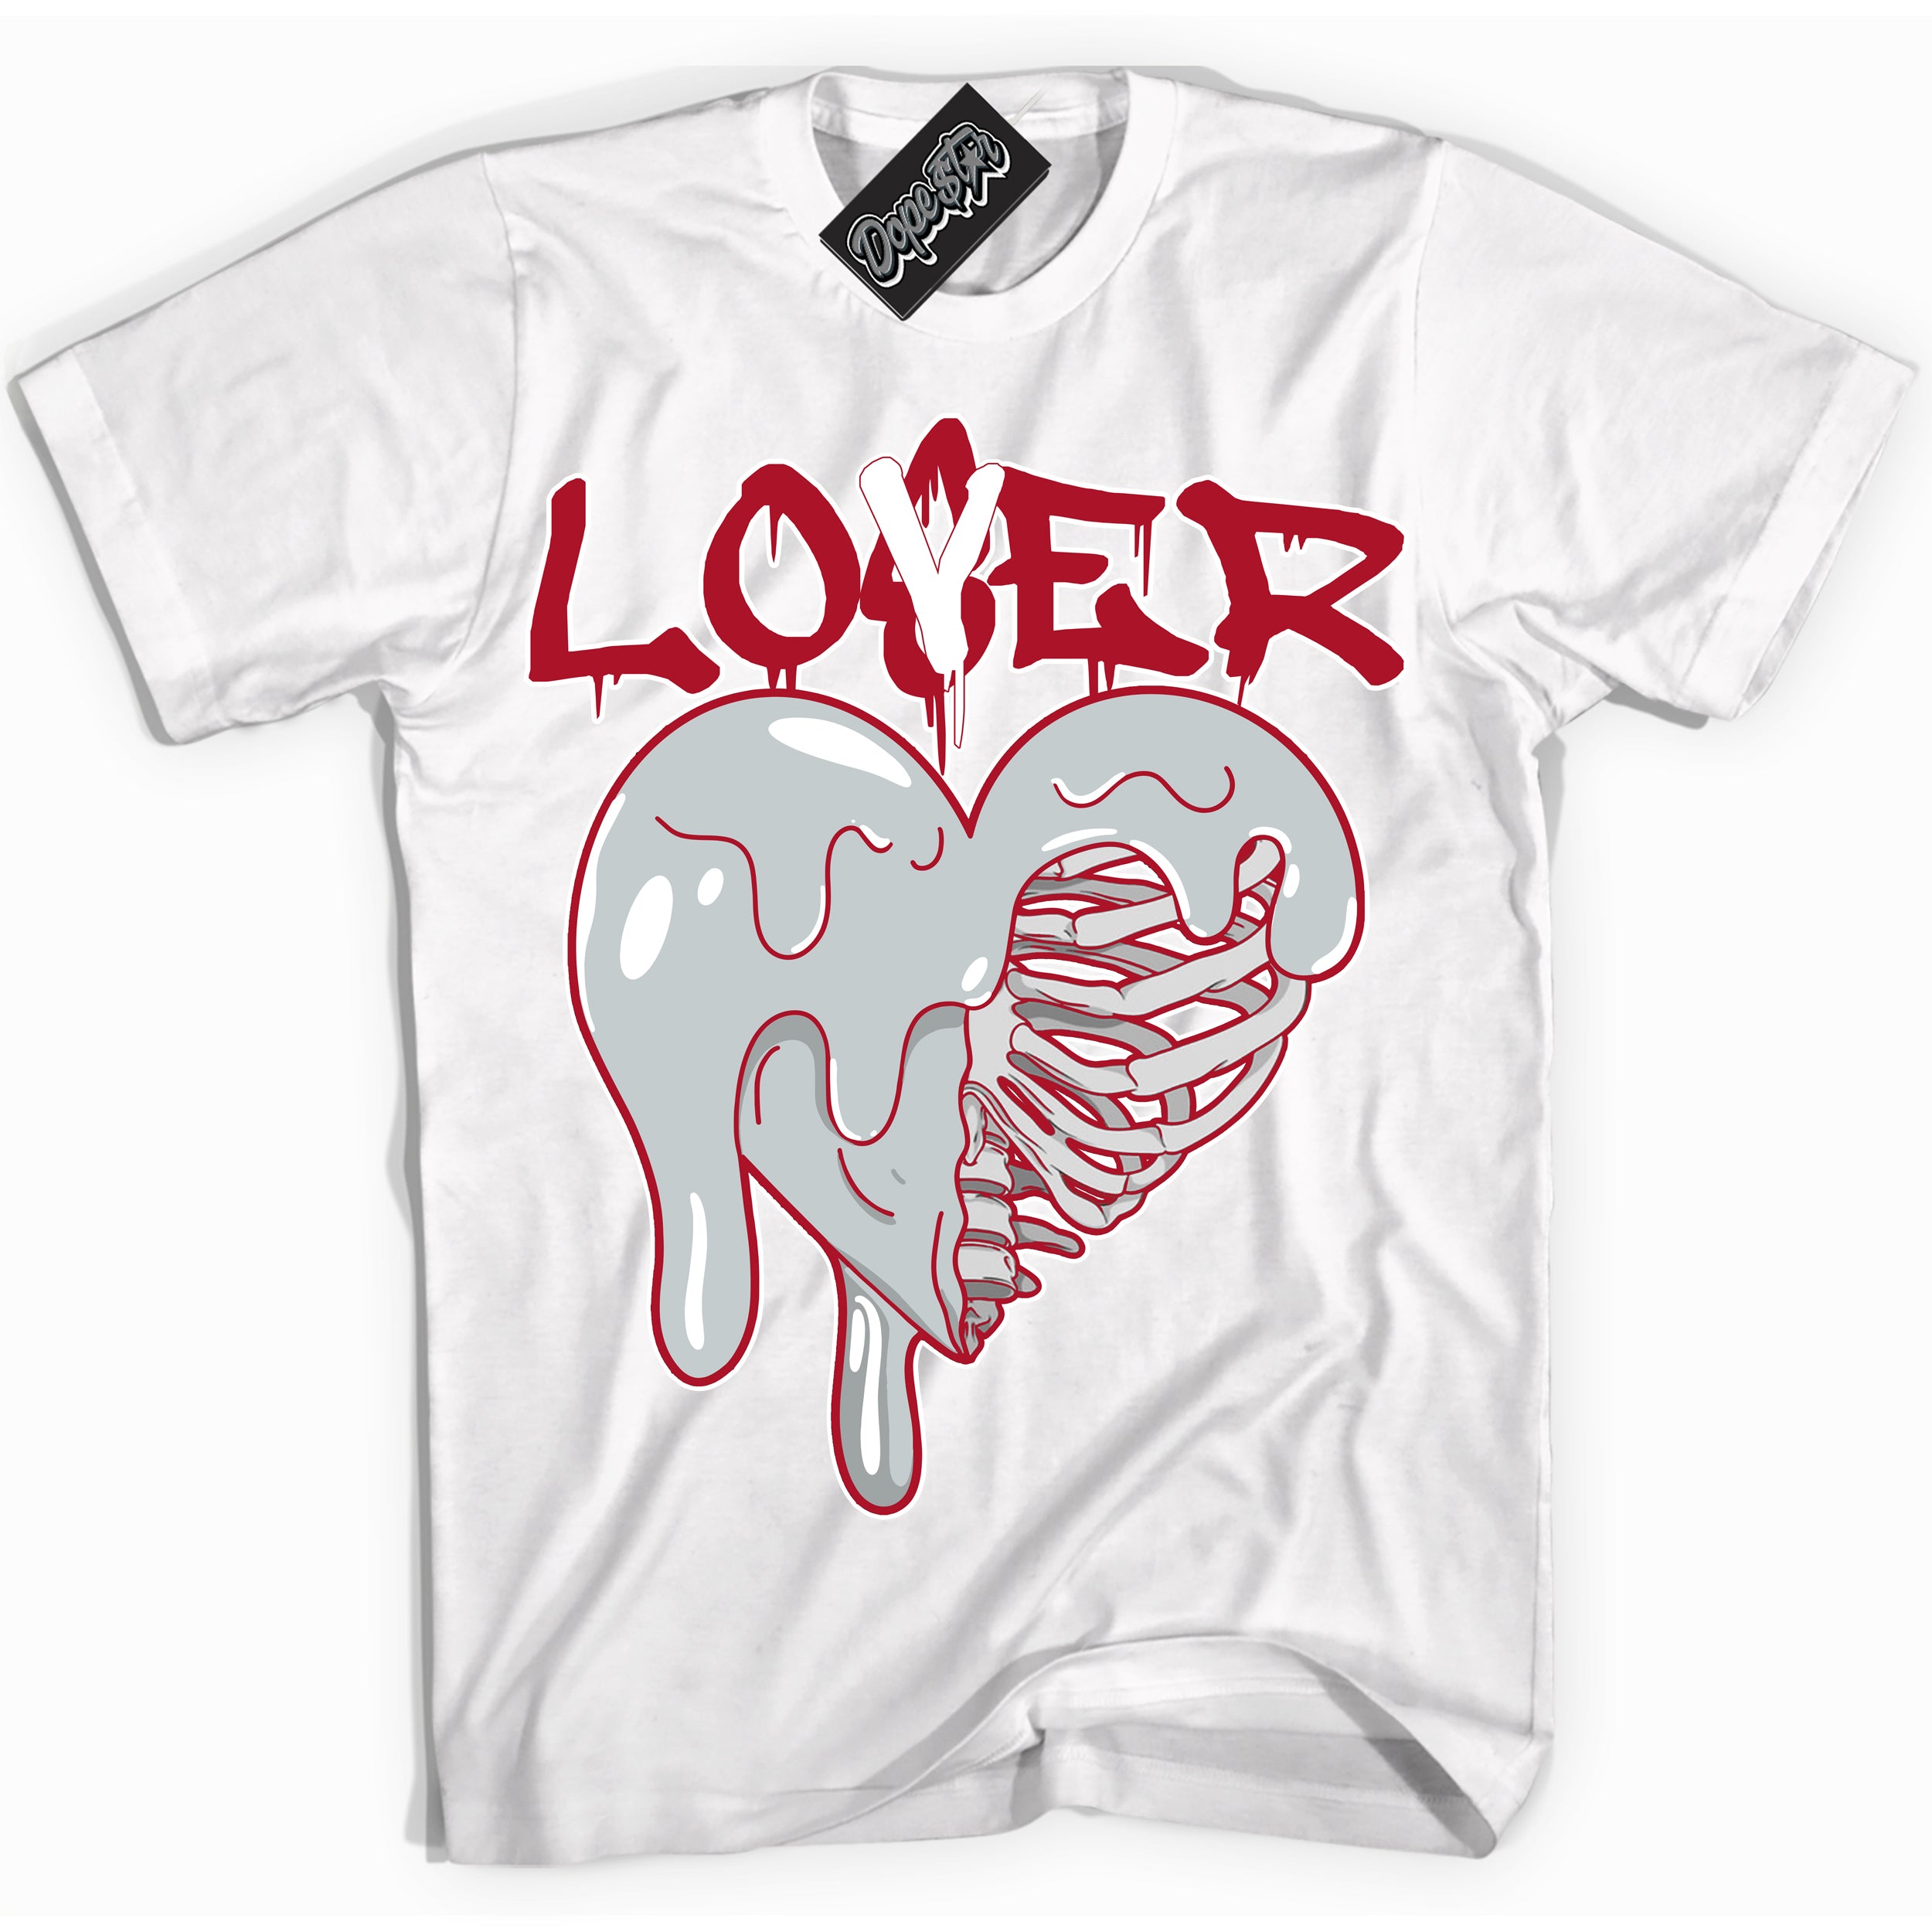 Cool White Shirt with “ Lover Loser” design that perfectly matches Reverse Ultraman Sneakers.